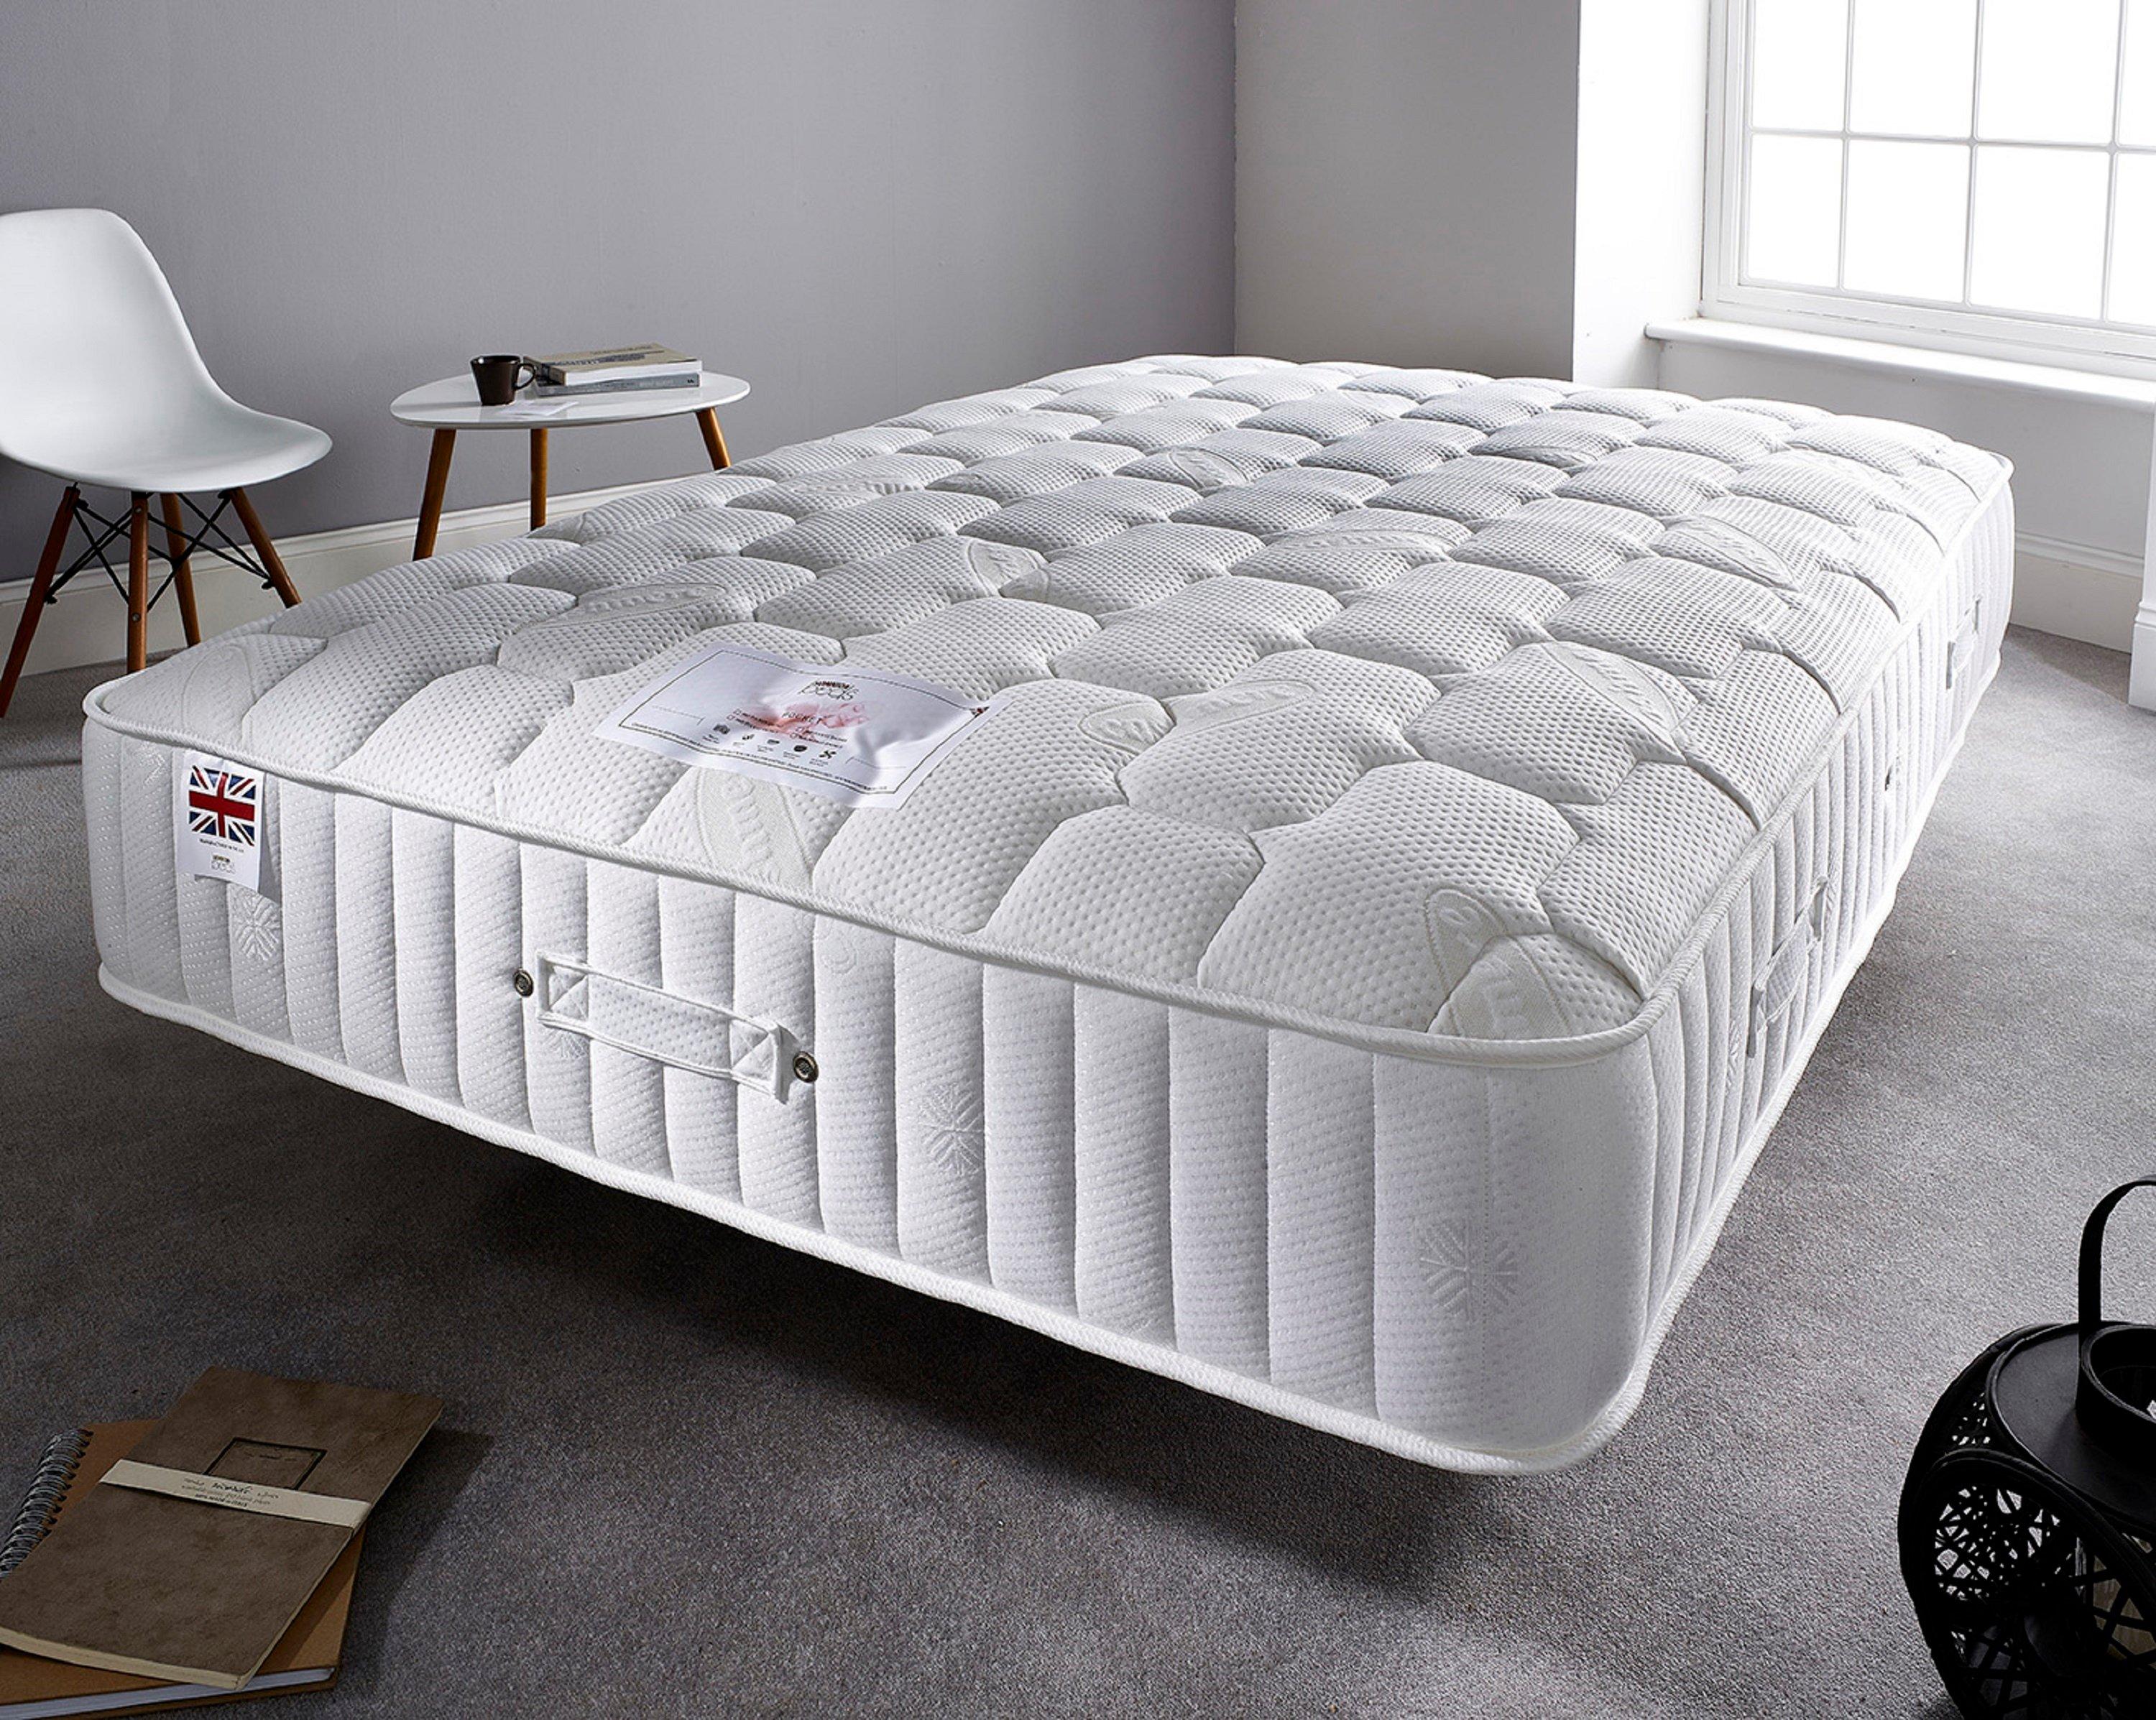 Sovereign 3500 Pocket Sprung with Memory Foam Quilted Mattress